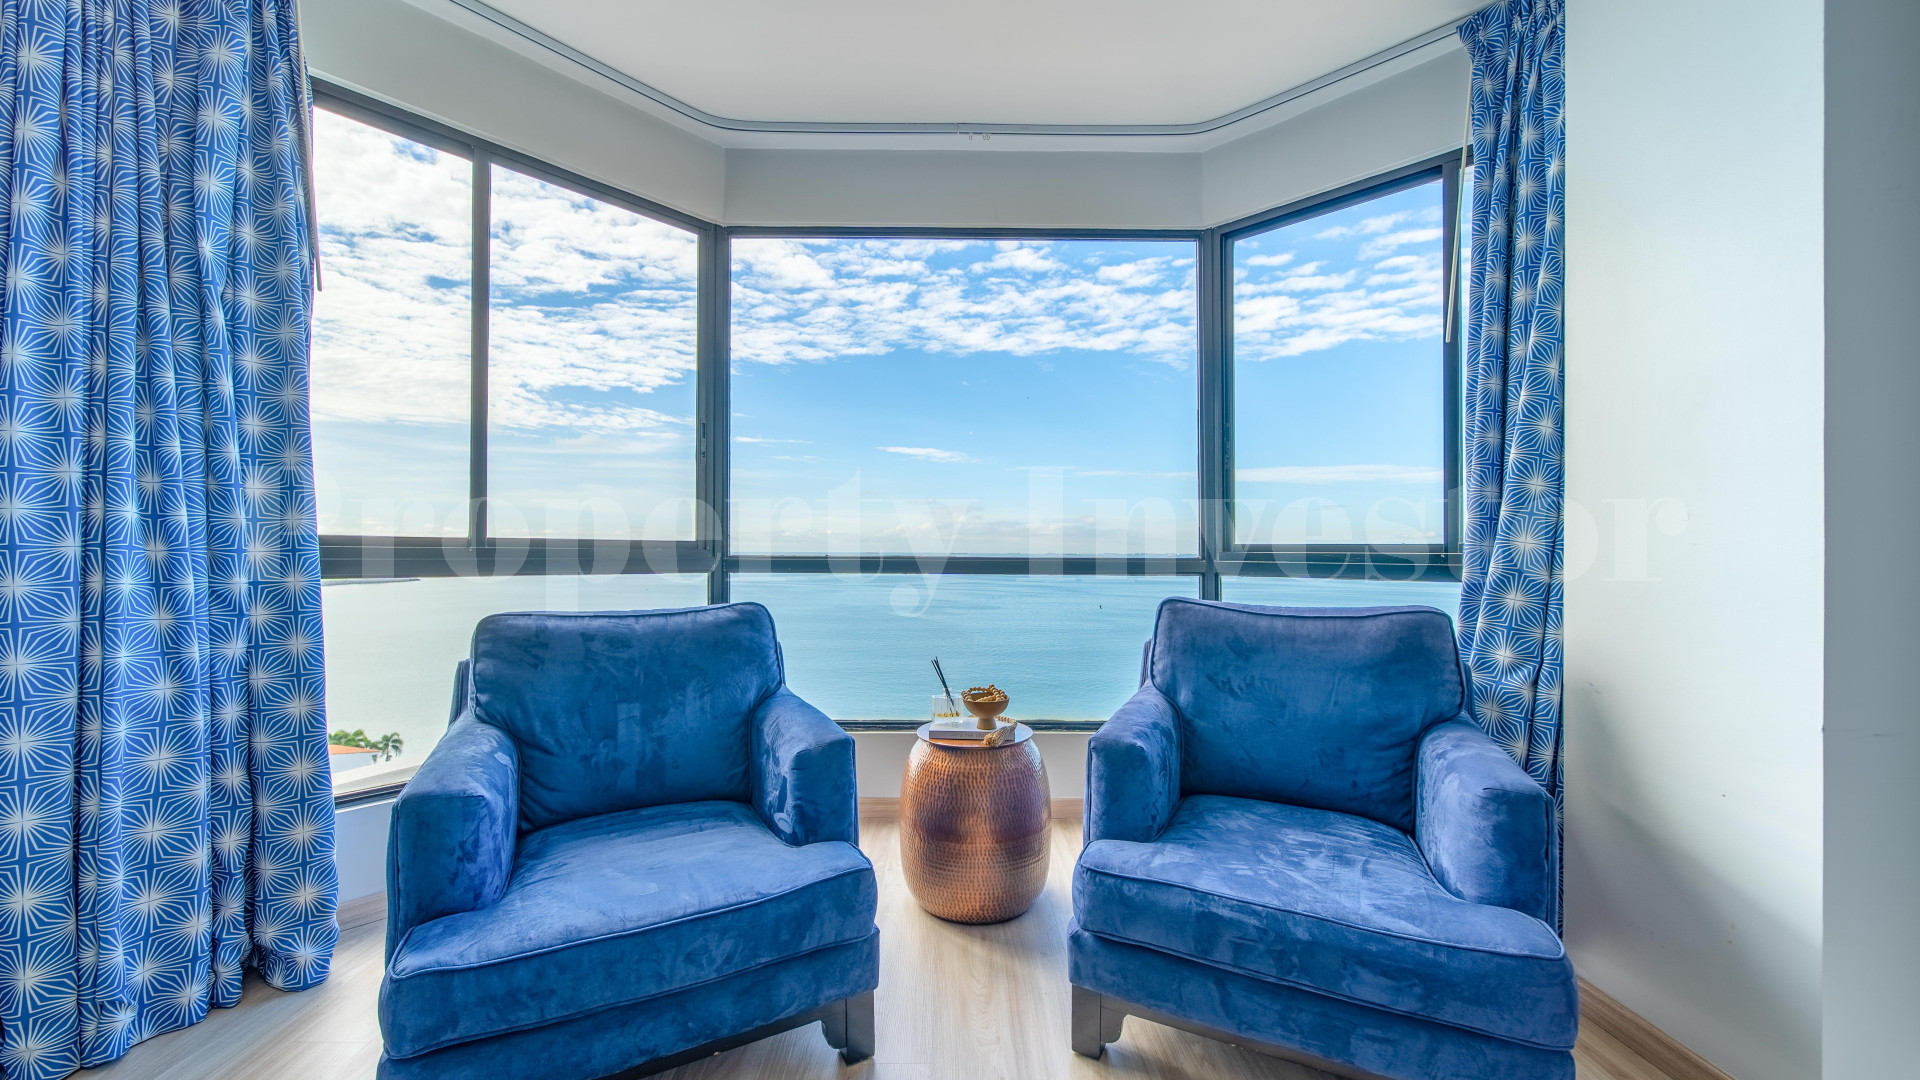 Iconic 5 Bedroom Luxury Condominium with Unparalleled City Views for Sale in Panama City